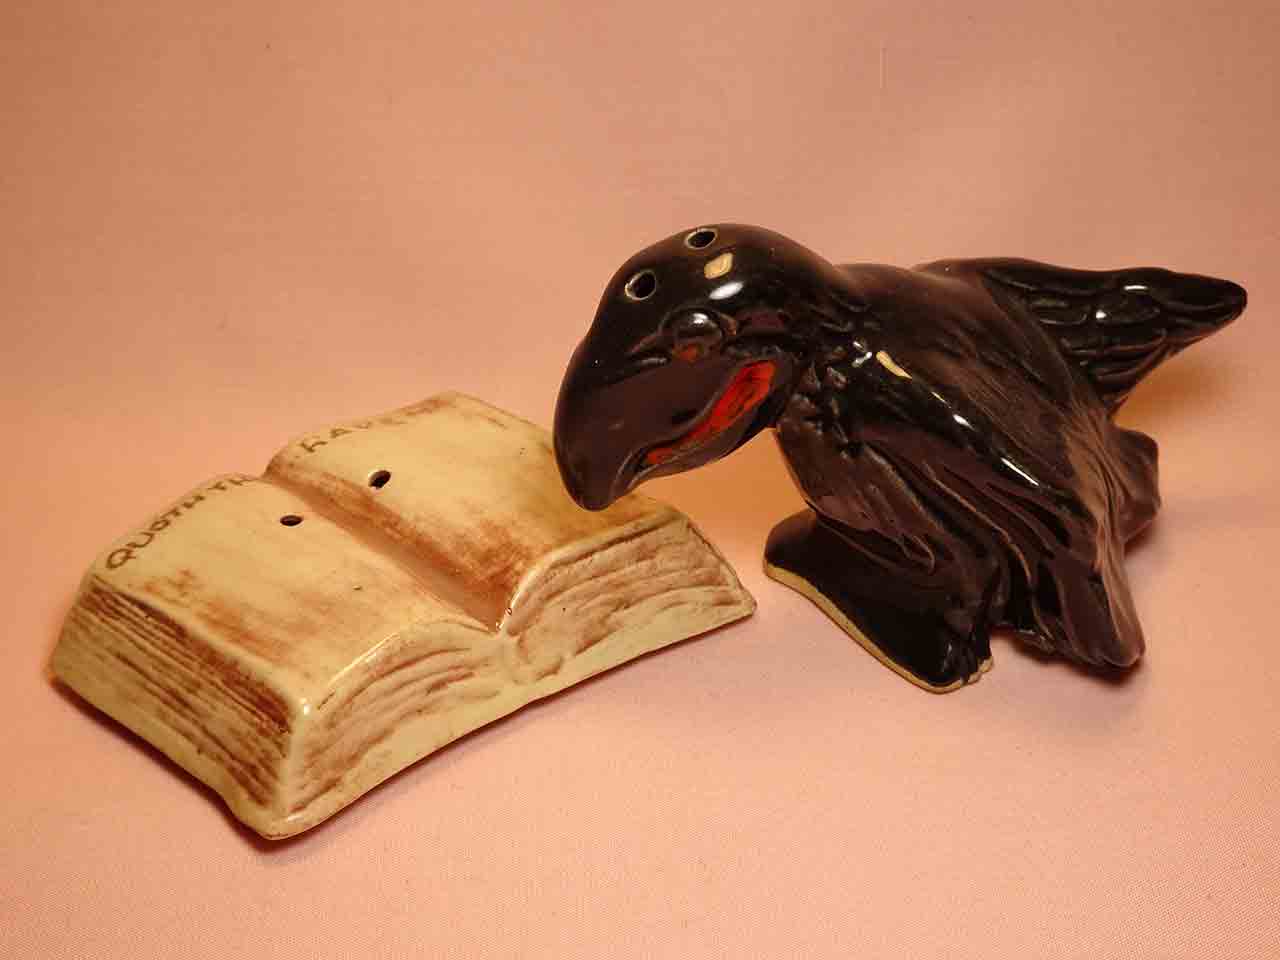 The Raven salt and pepper shakers